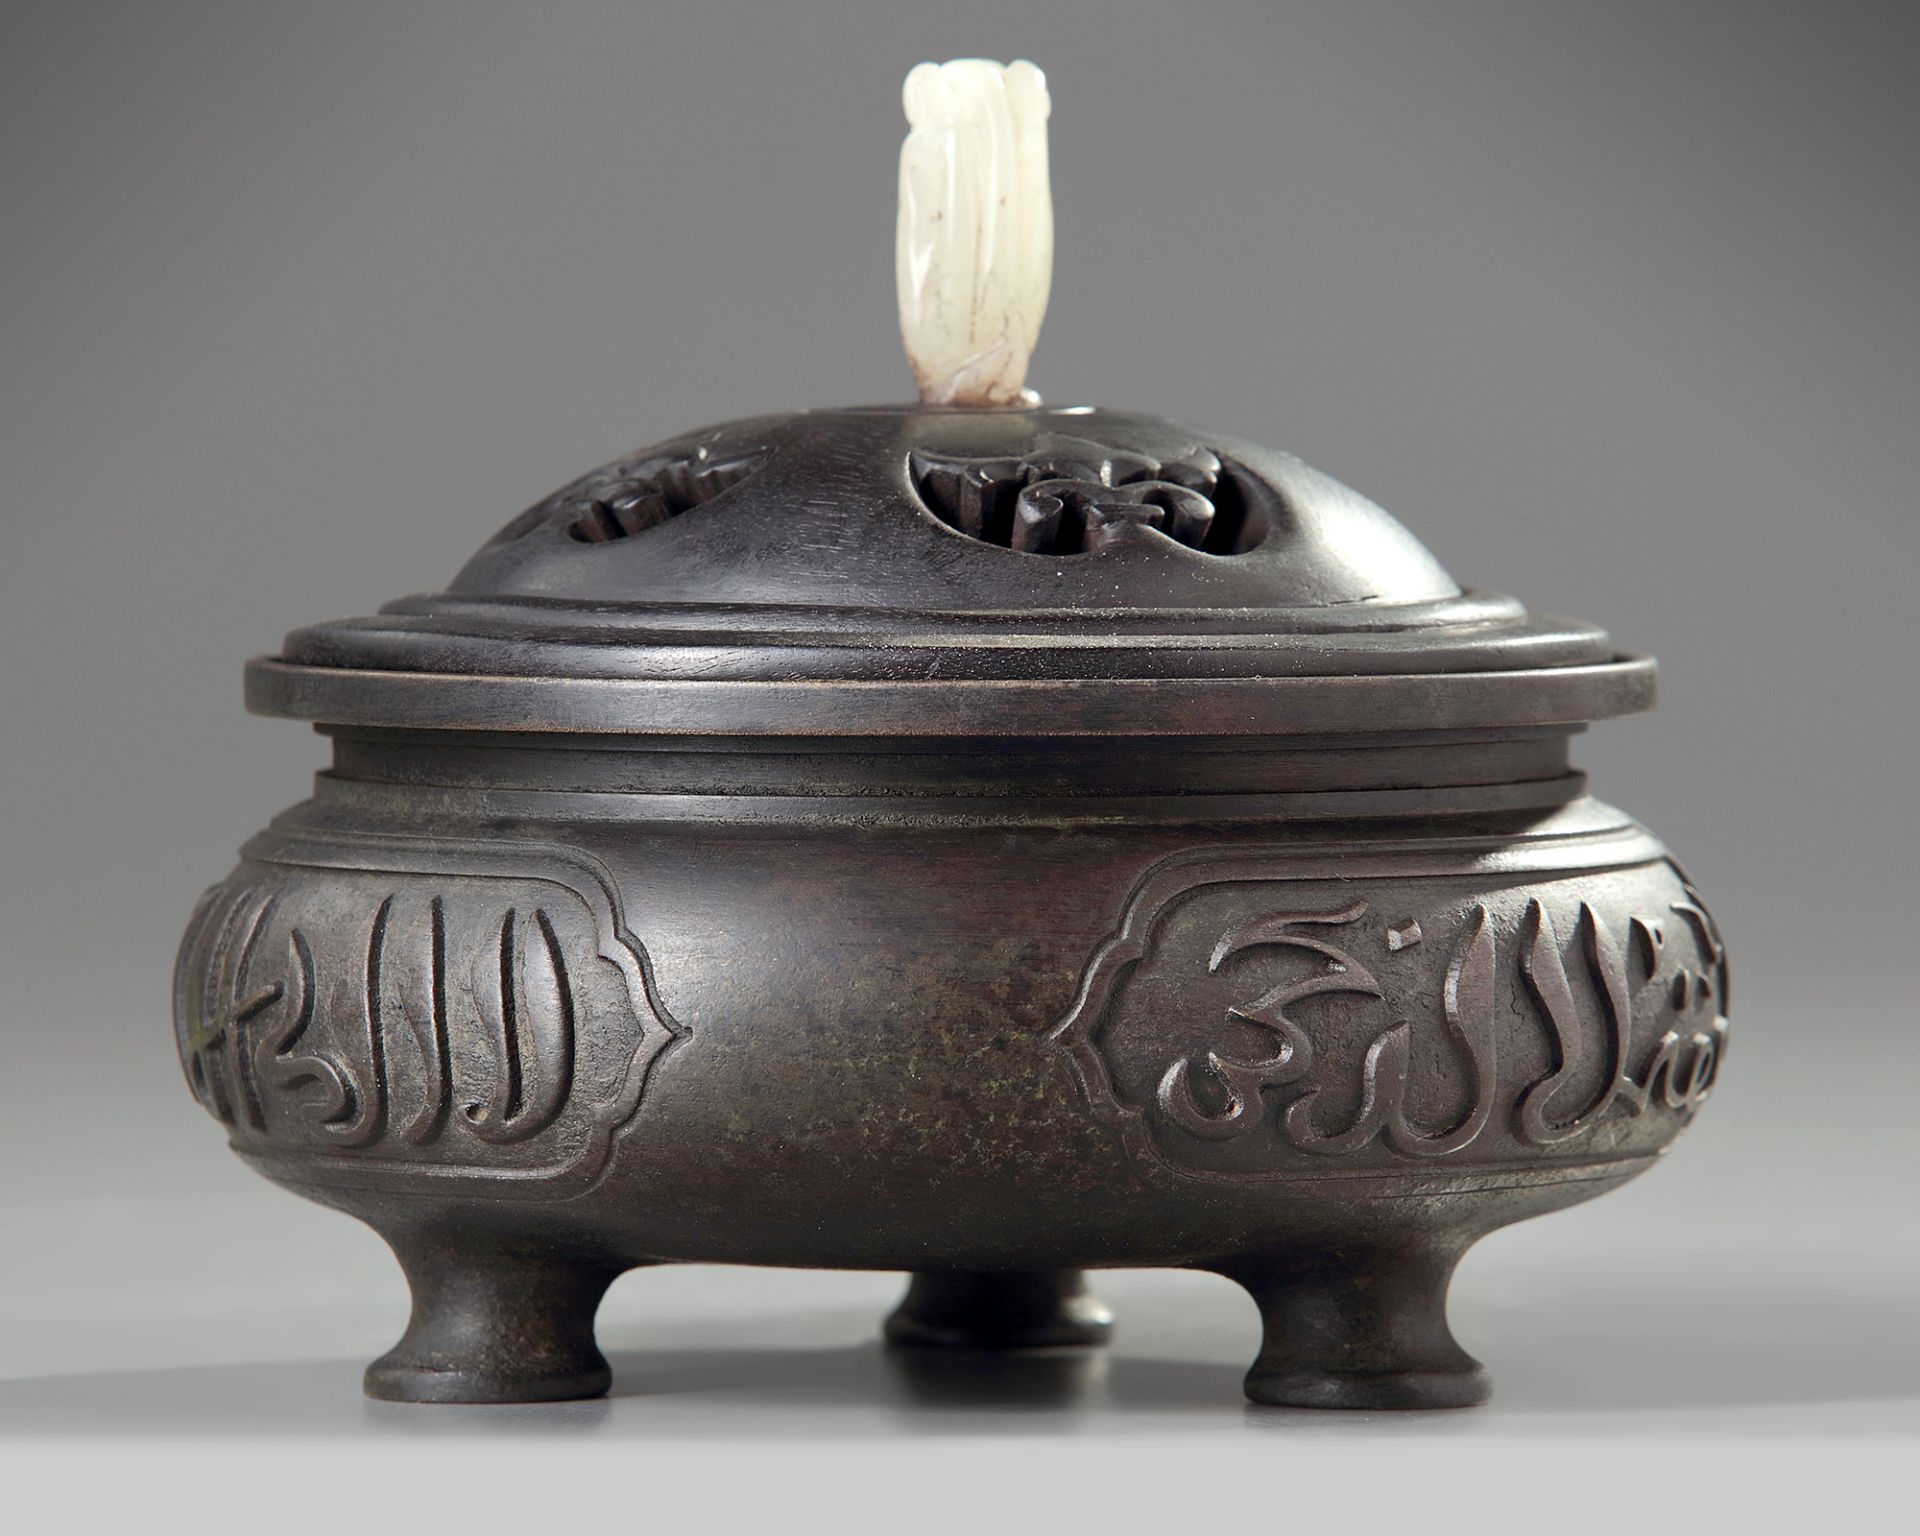 A CHINESE BRONZE TRIPOD CENSER FOR THE ISLAMIC MARKET, QING DYNASTY (1644-1911) - Image 3 of 4